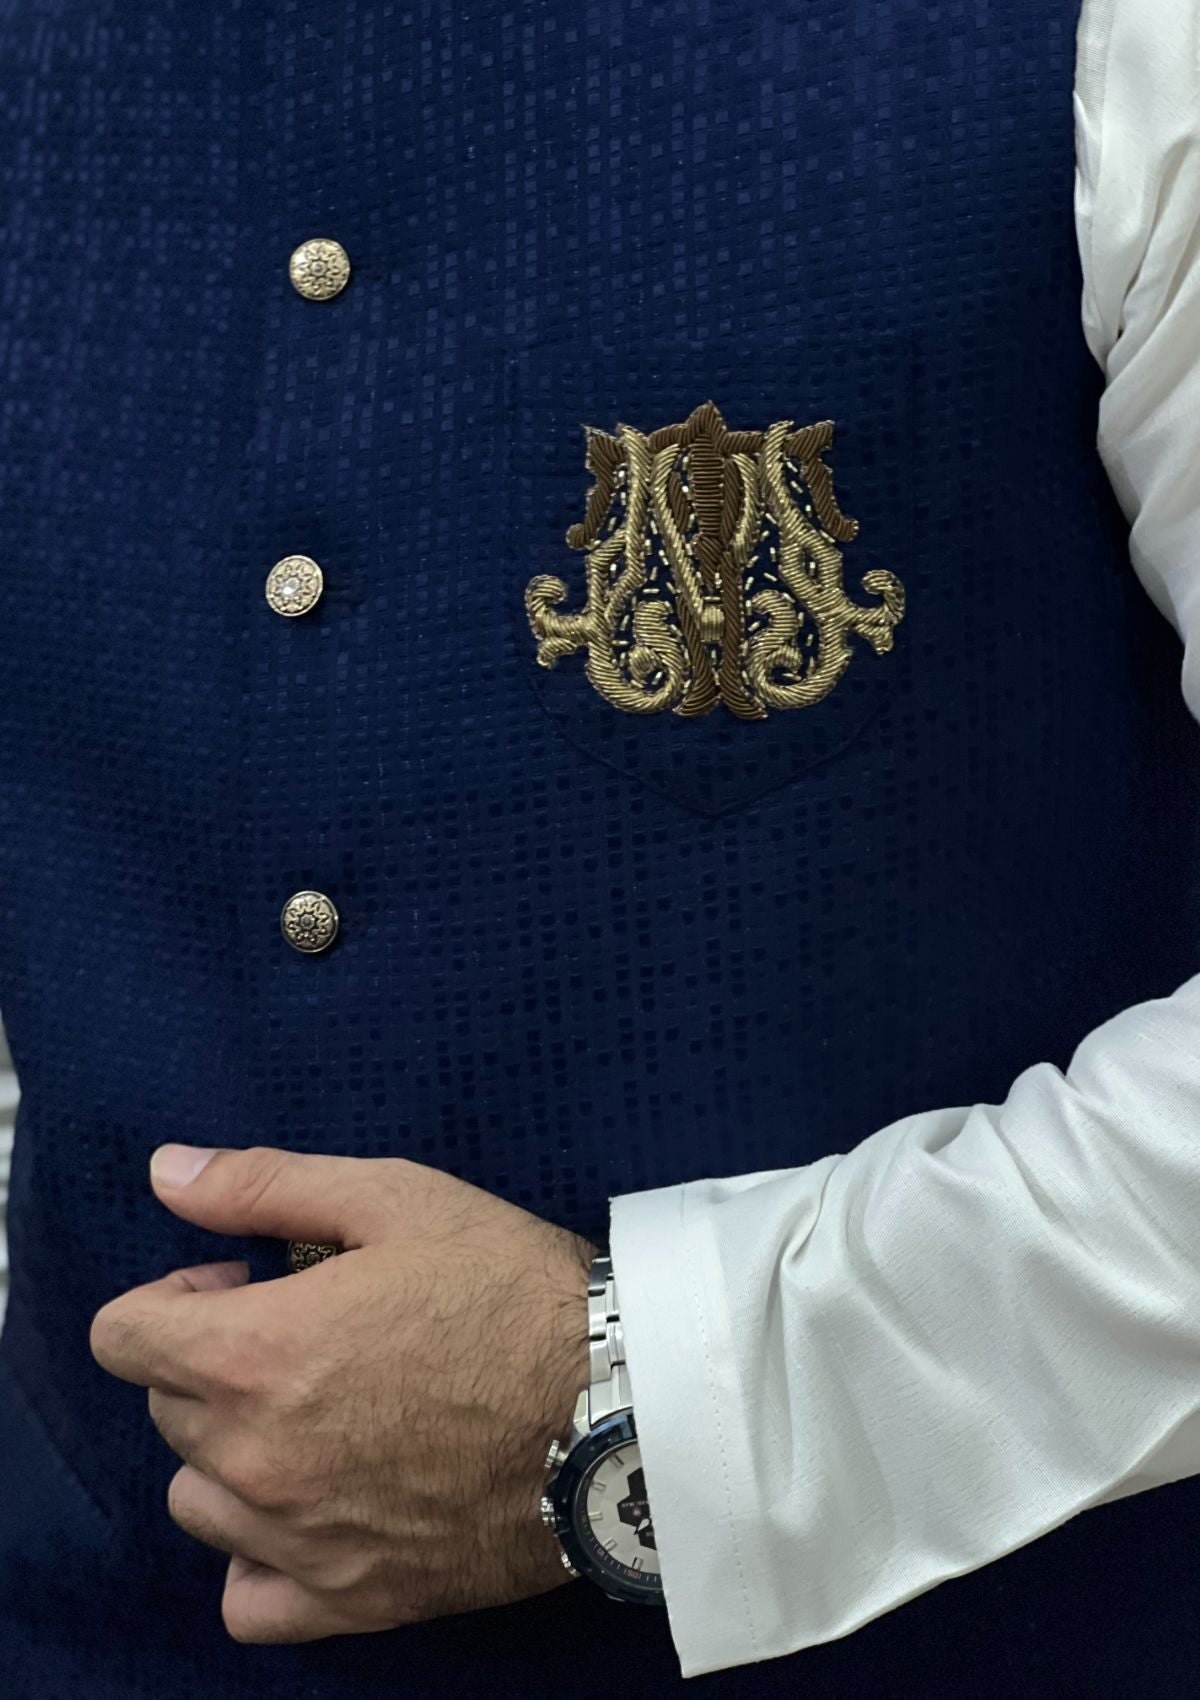 Stitched Collection - T-Mark Apparel - Waistcoat Suit - RWT - 1190